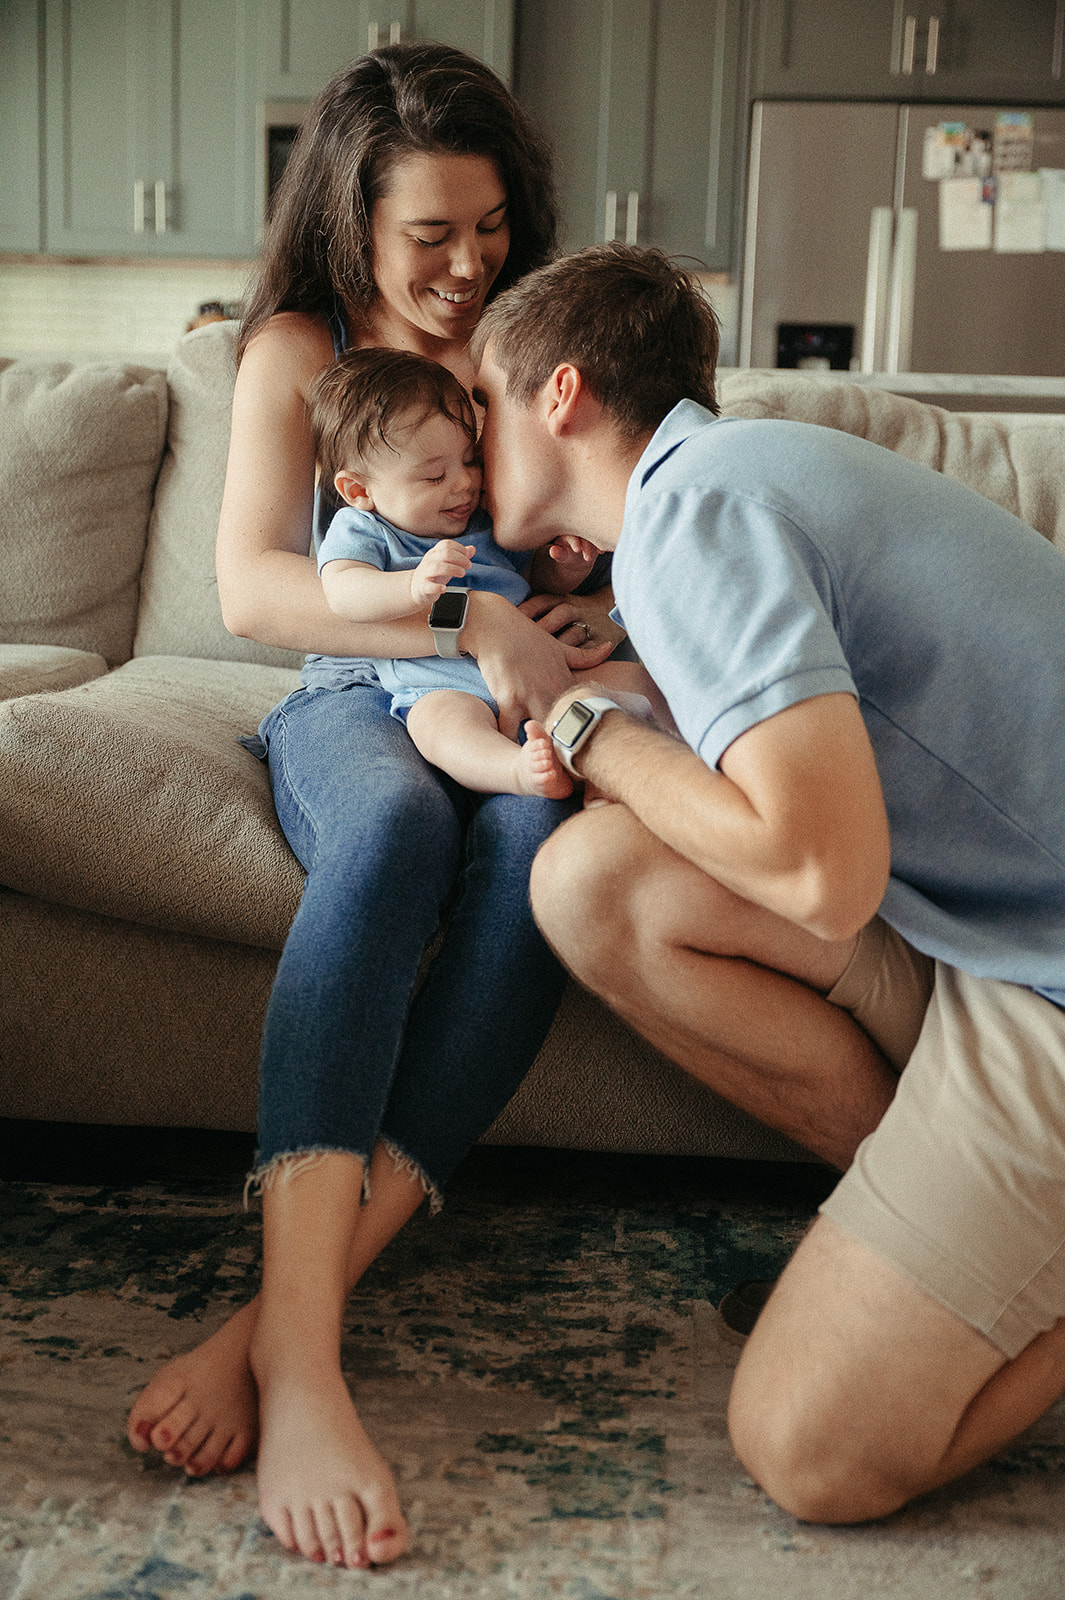 Family Session at home with Mom, Dad, and Baby. (The dogs too!) Family and lifestyle photographer based in Englewood, FL